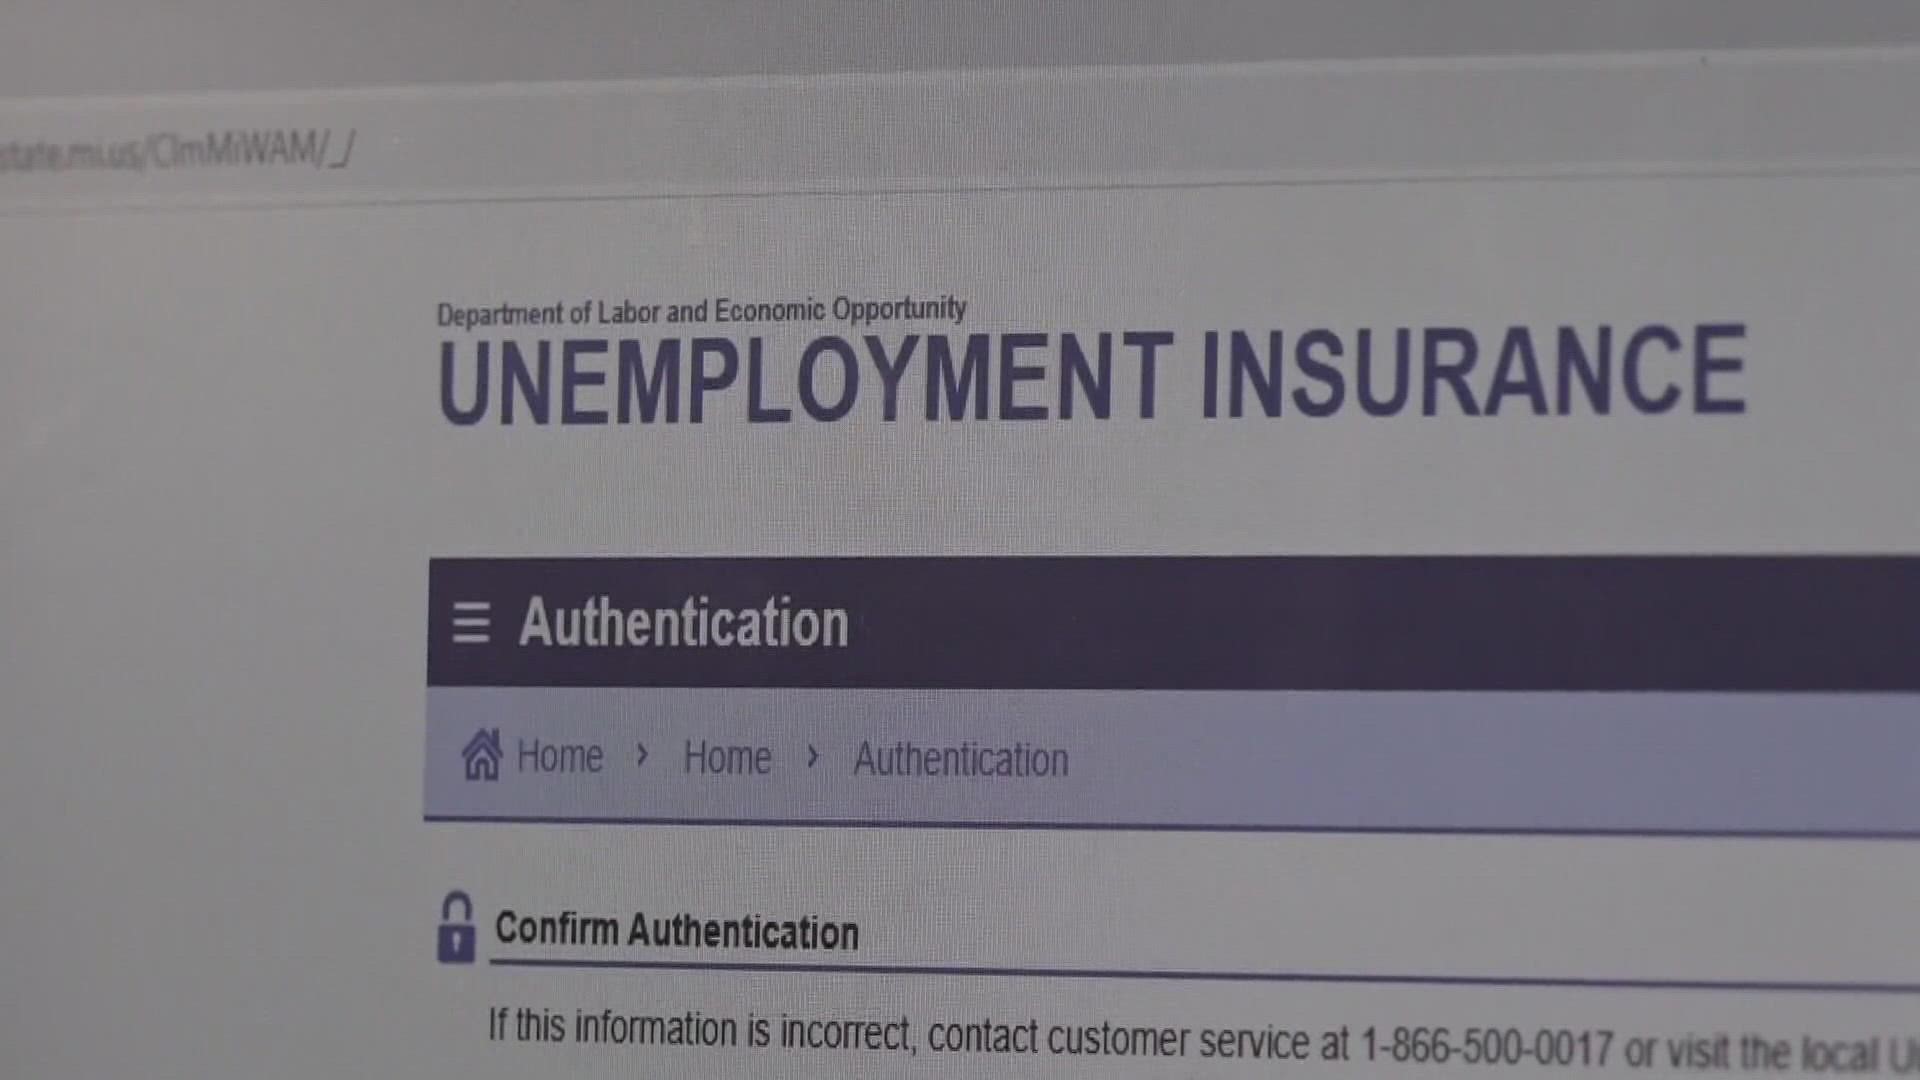 Gov. Gretchen Whitmer has called for the creation of an Unemployment Insurance Fraud Response Team to catch and prevent future cases of fraud.